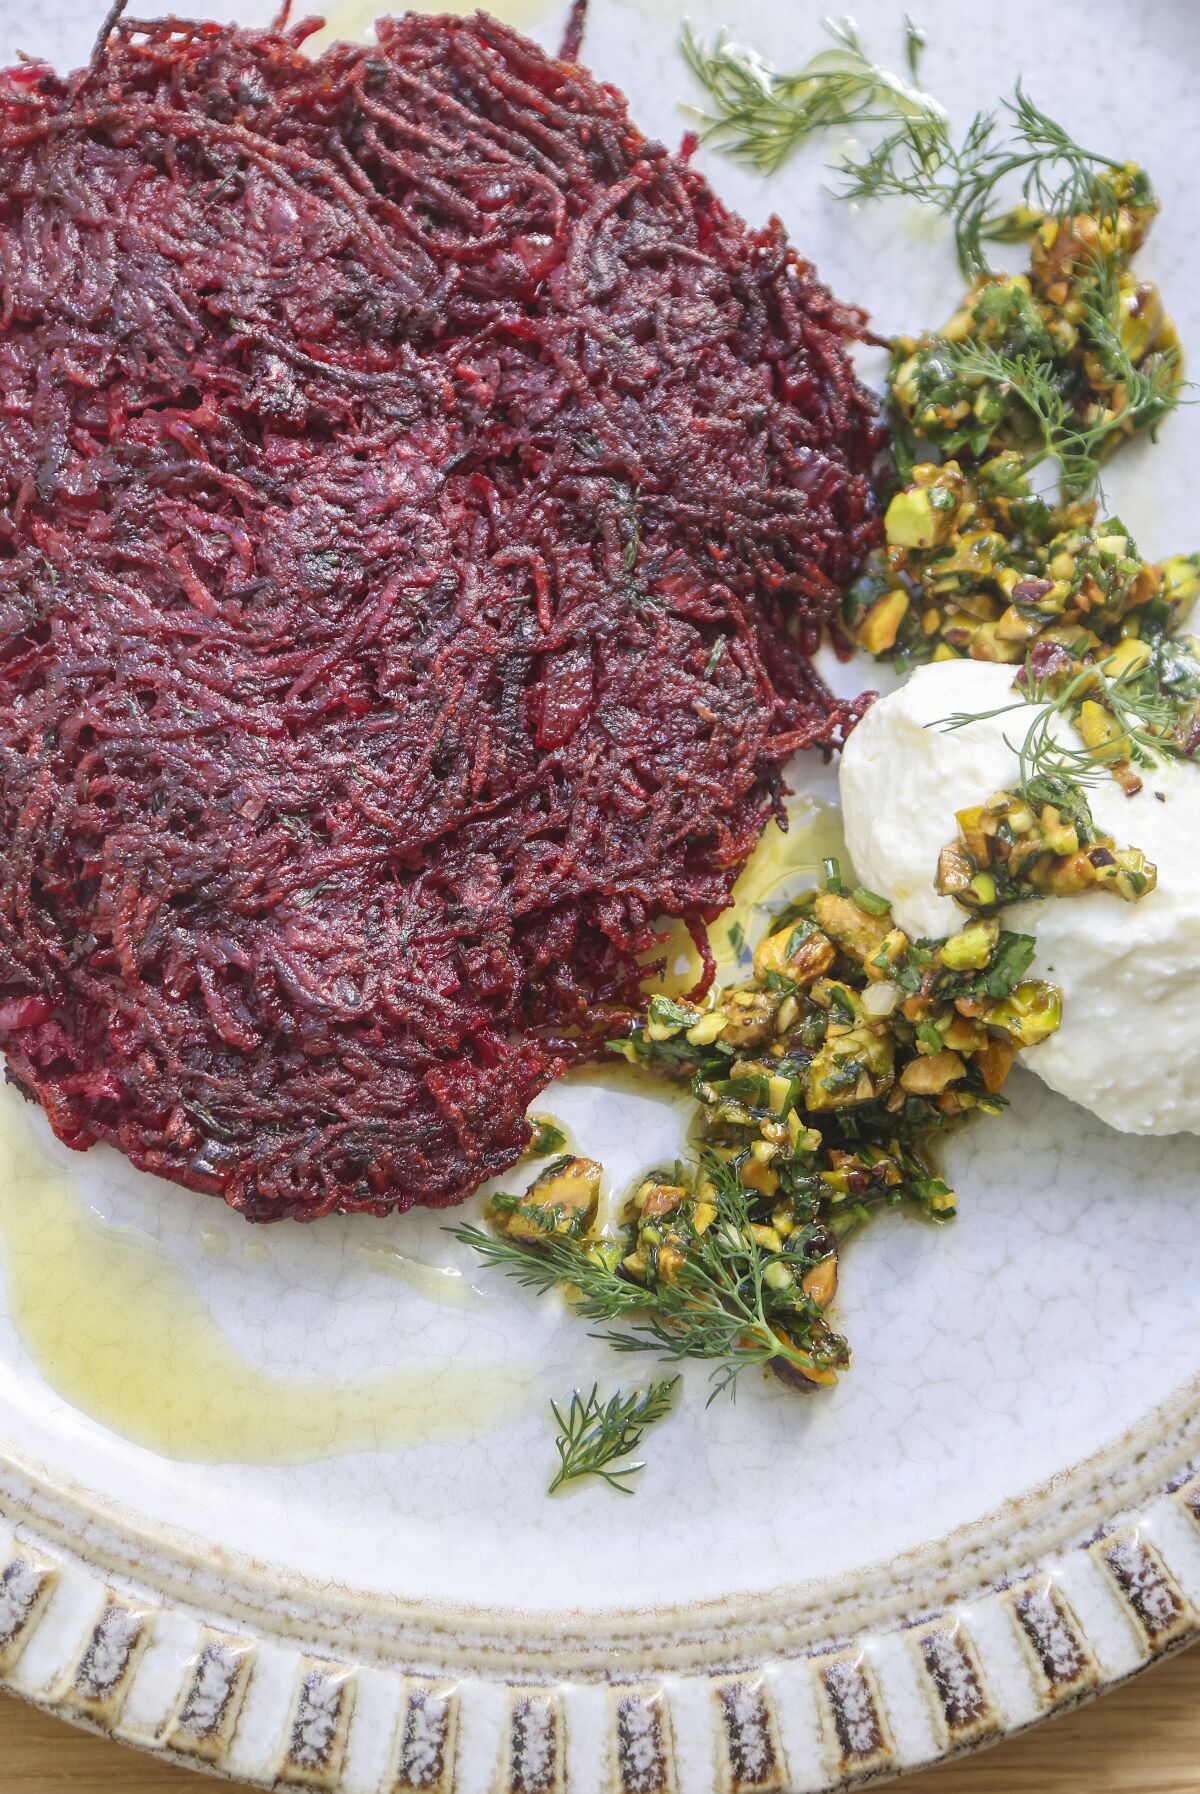 Beet latkes by chef Jeff Armstrong at Gold Finch Modern Delicatessen.